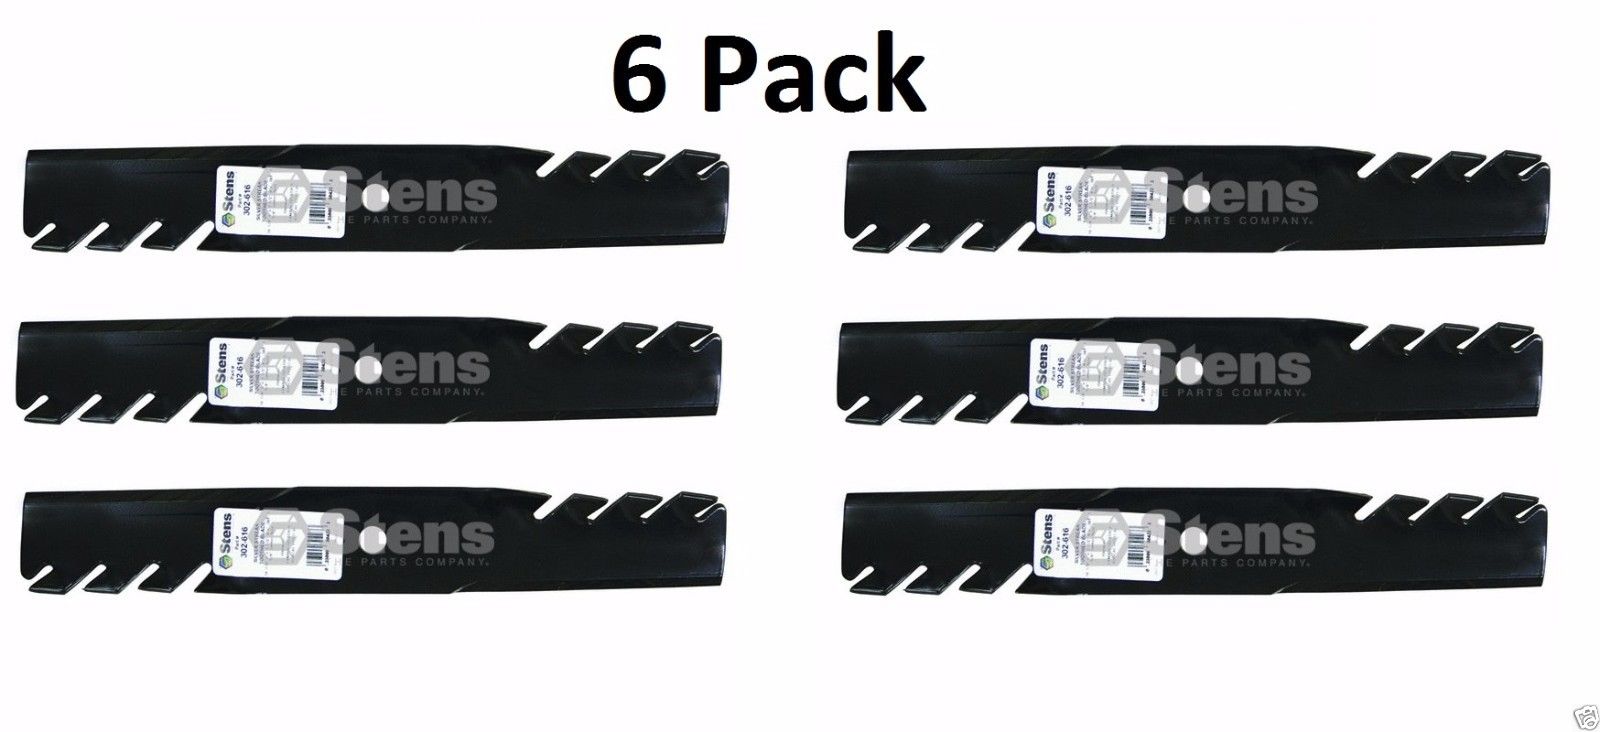 6 Pack Stens 302-616 Toothed Blade For Gravely 00273000 04919100  Giant Vac 0640